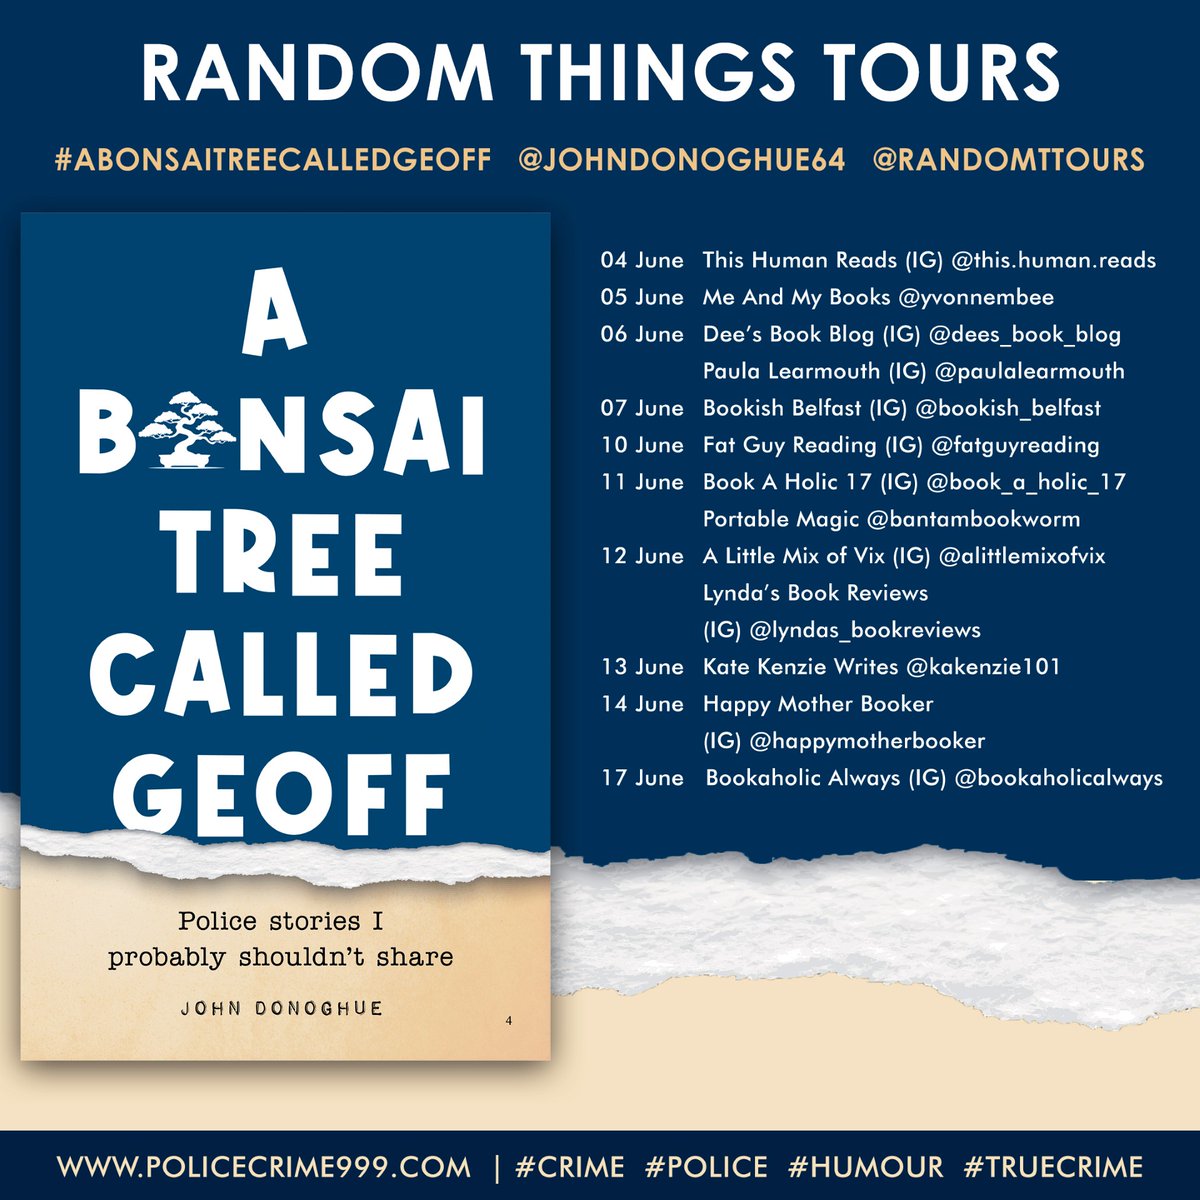 Delighted to organise this #RandomThingsTours Blog Tour for #ABonsaiTreeCalledGeoff by @JohnDonoghue64 Begins 04 June